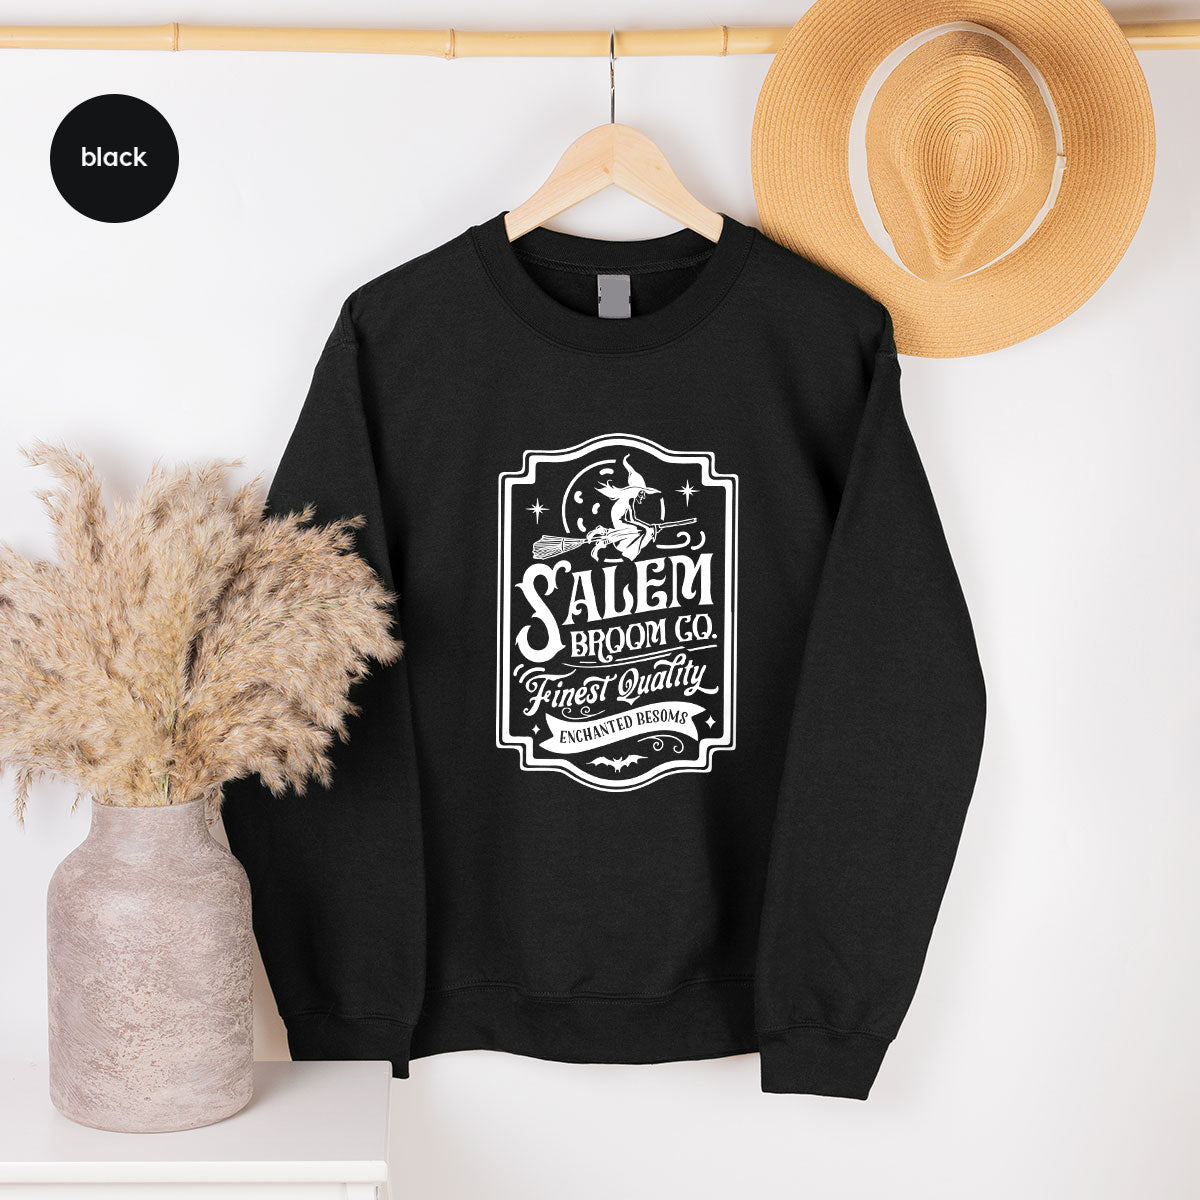 Halloween Shirts, Spooky Season Sweatshirt, Witch Womens Clothing, Funny Gifts for Her, Witchy Graphic Tees, Girls Vneck TShirts